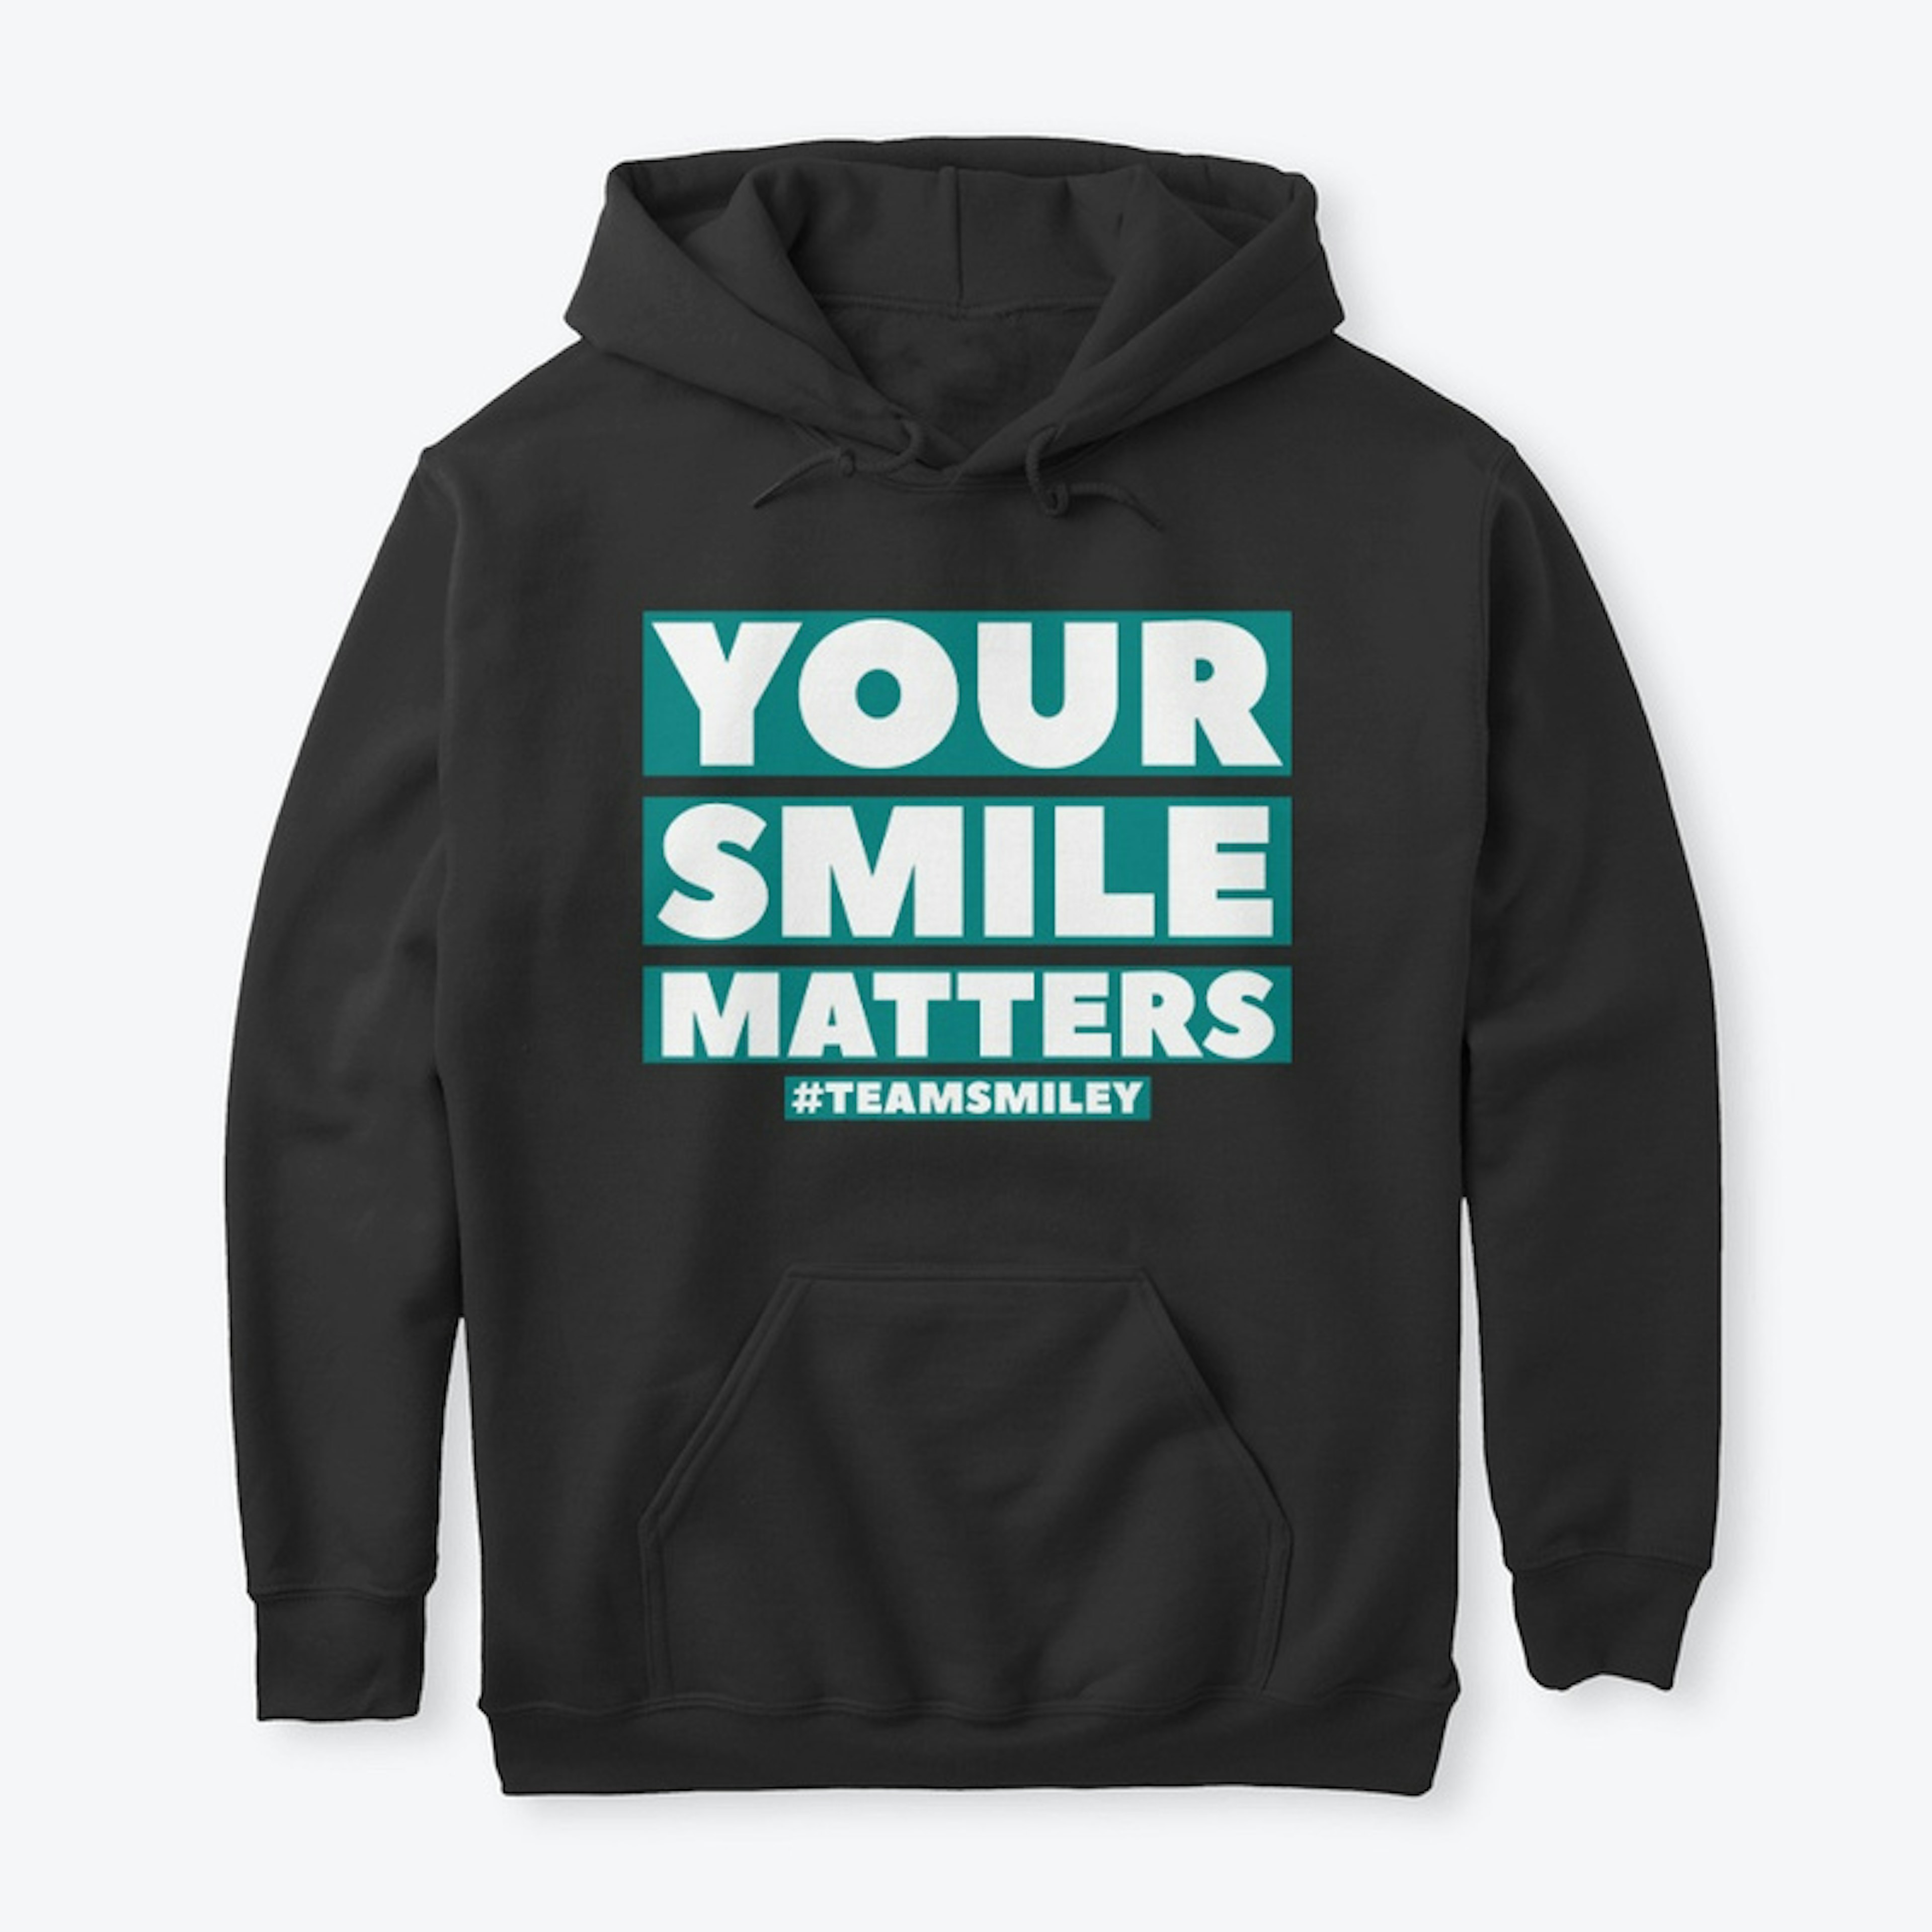 Your Smile Matters Collection!